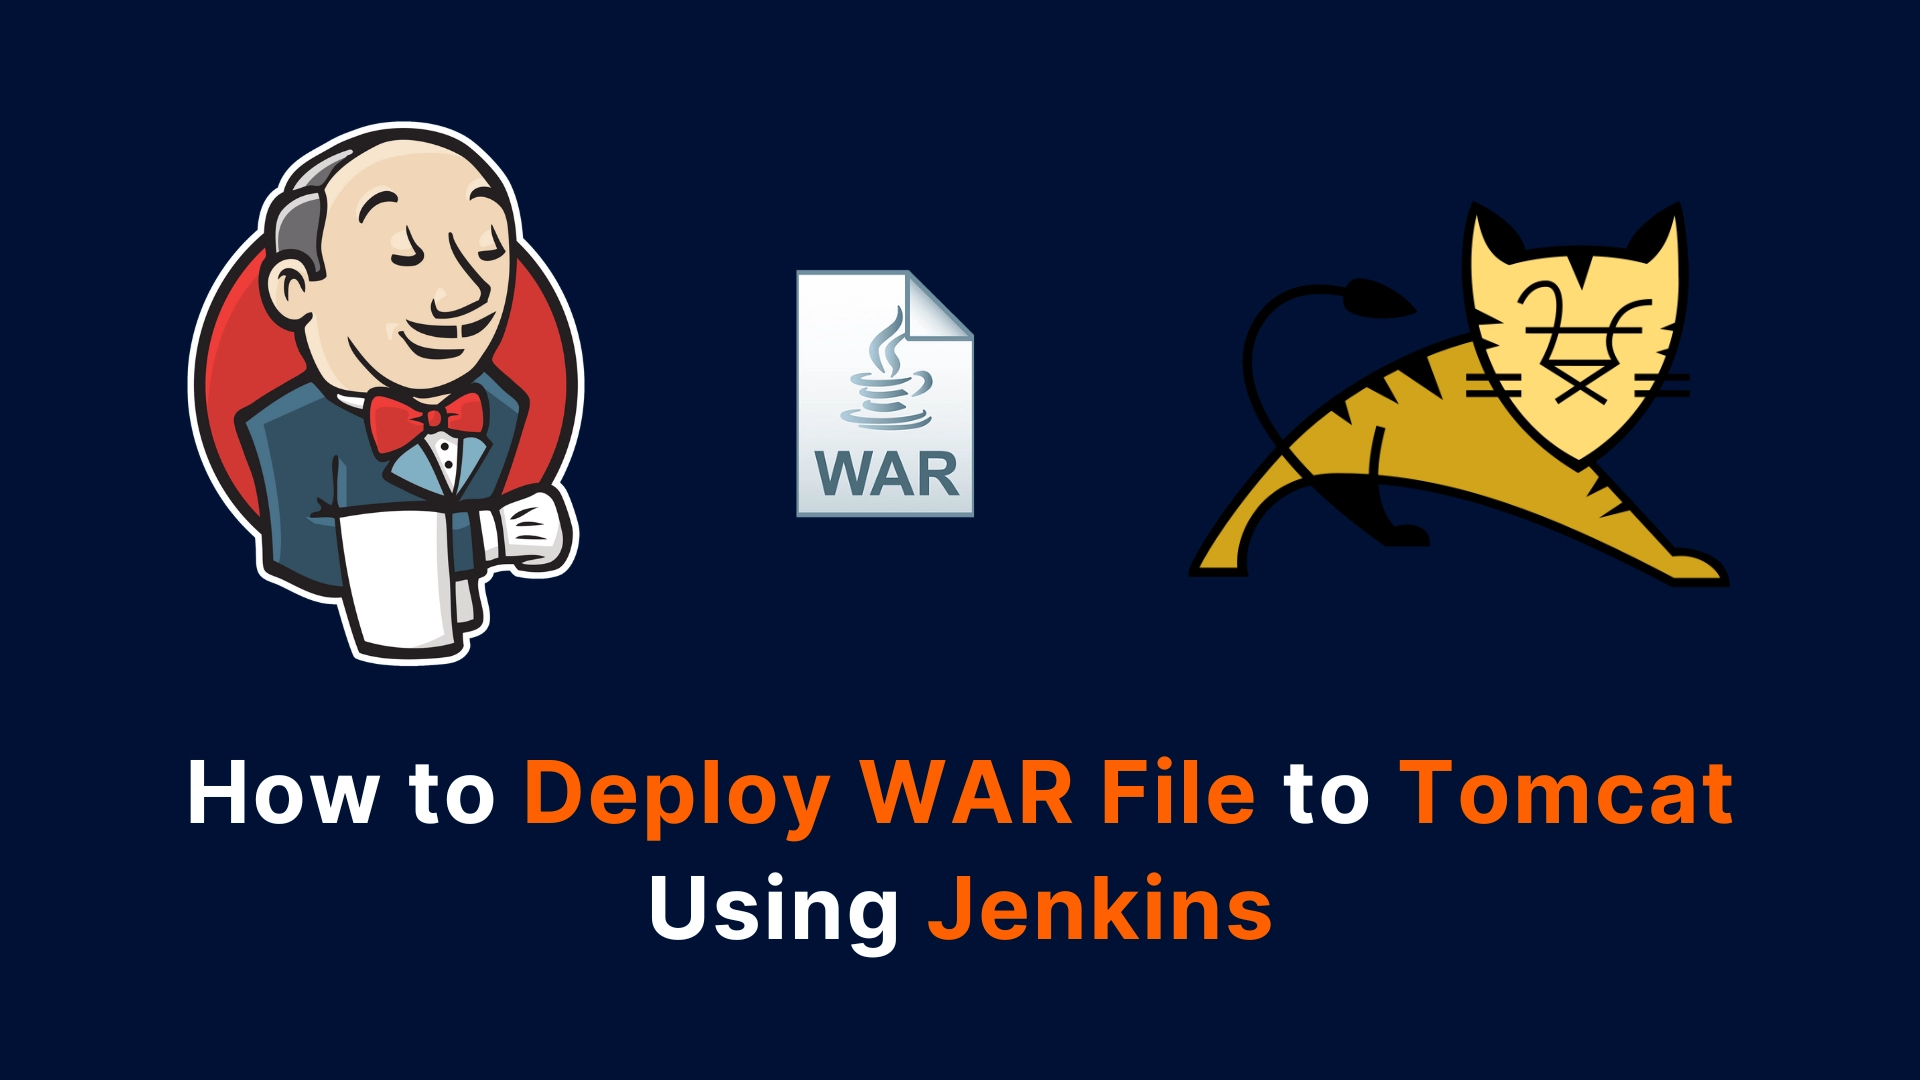 How to Deploy a WAR File to Tomcat Using Jenkins